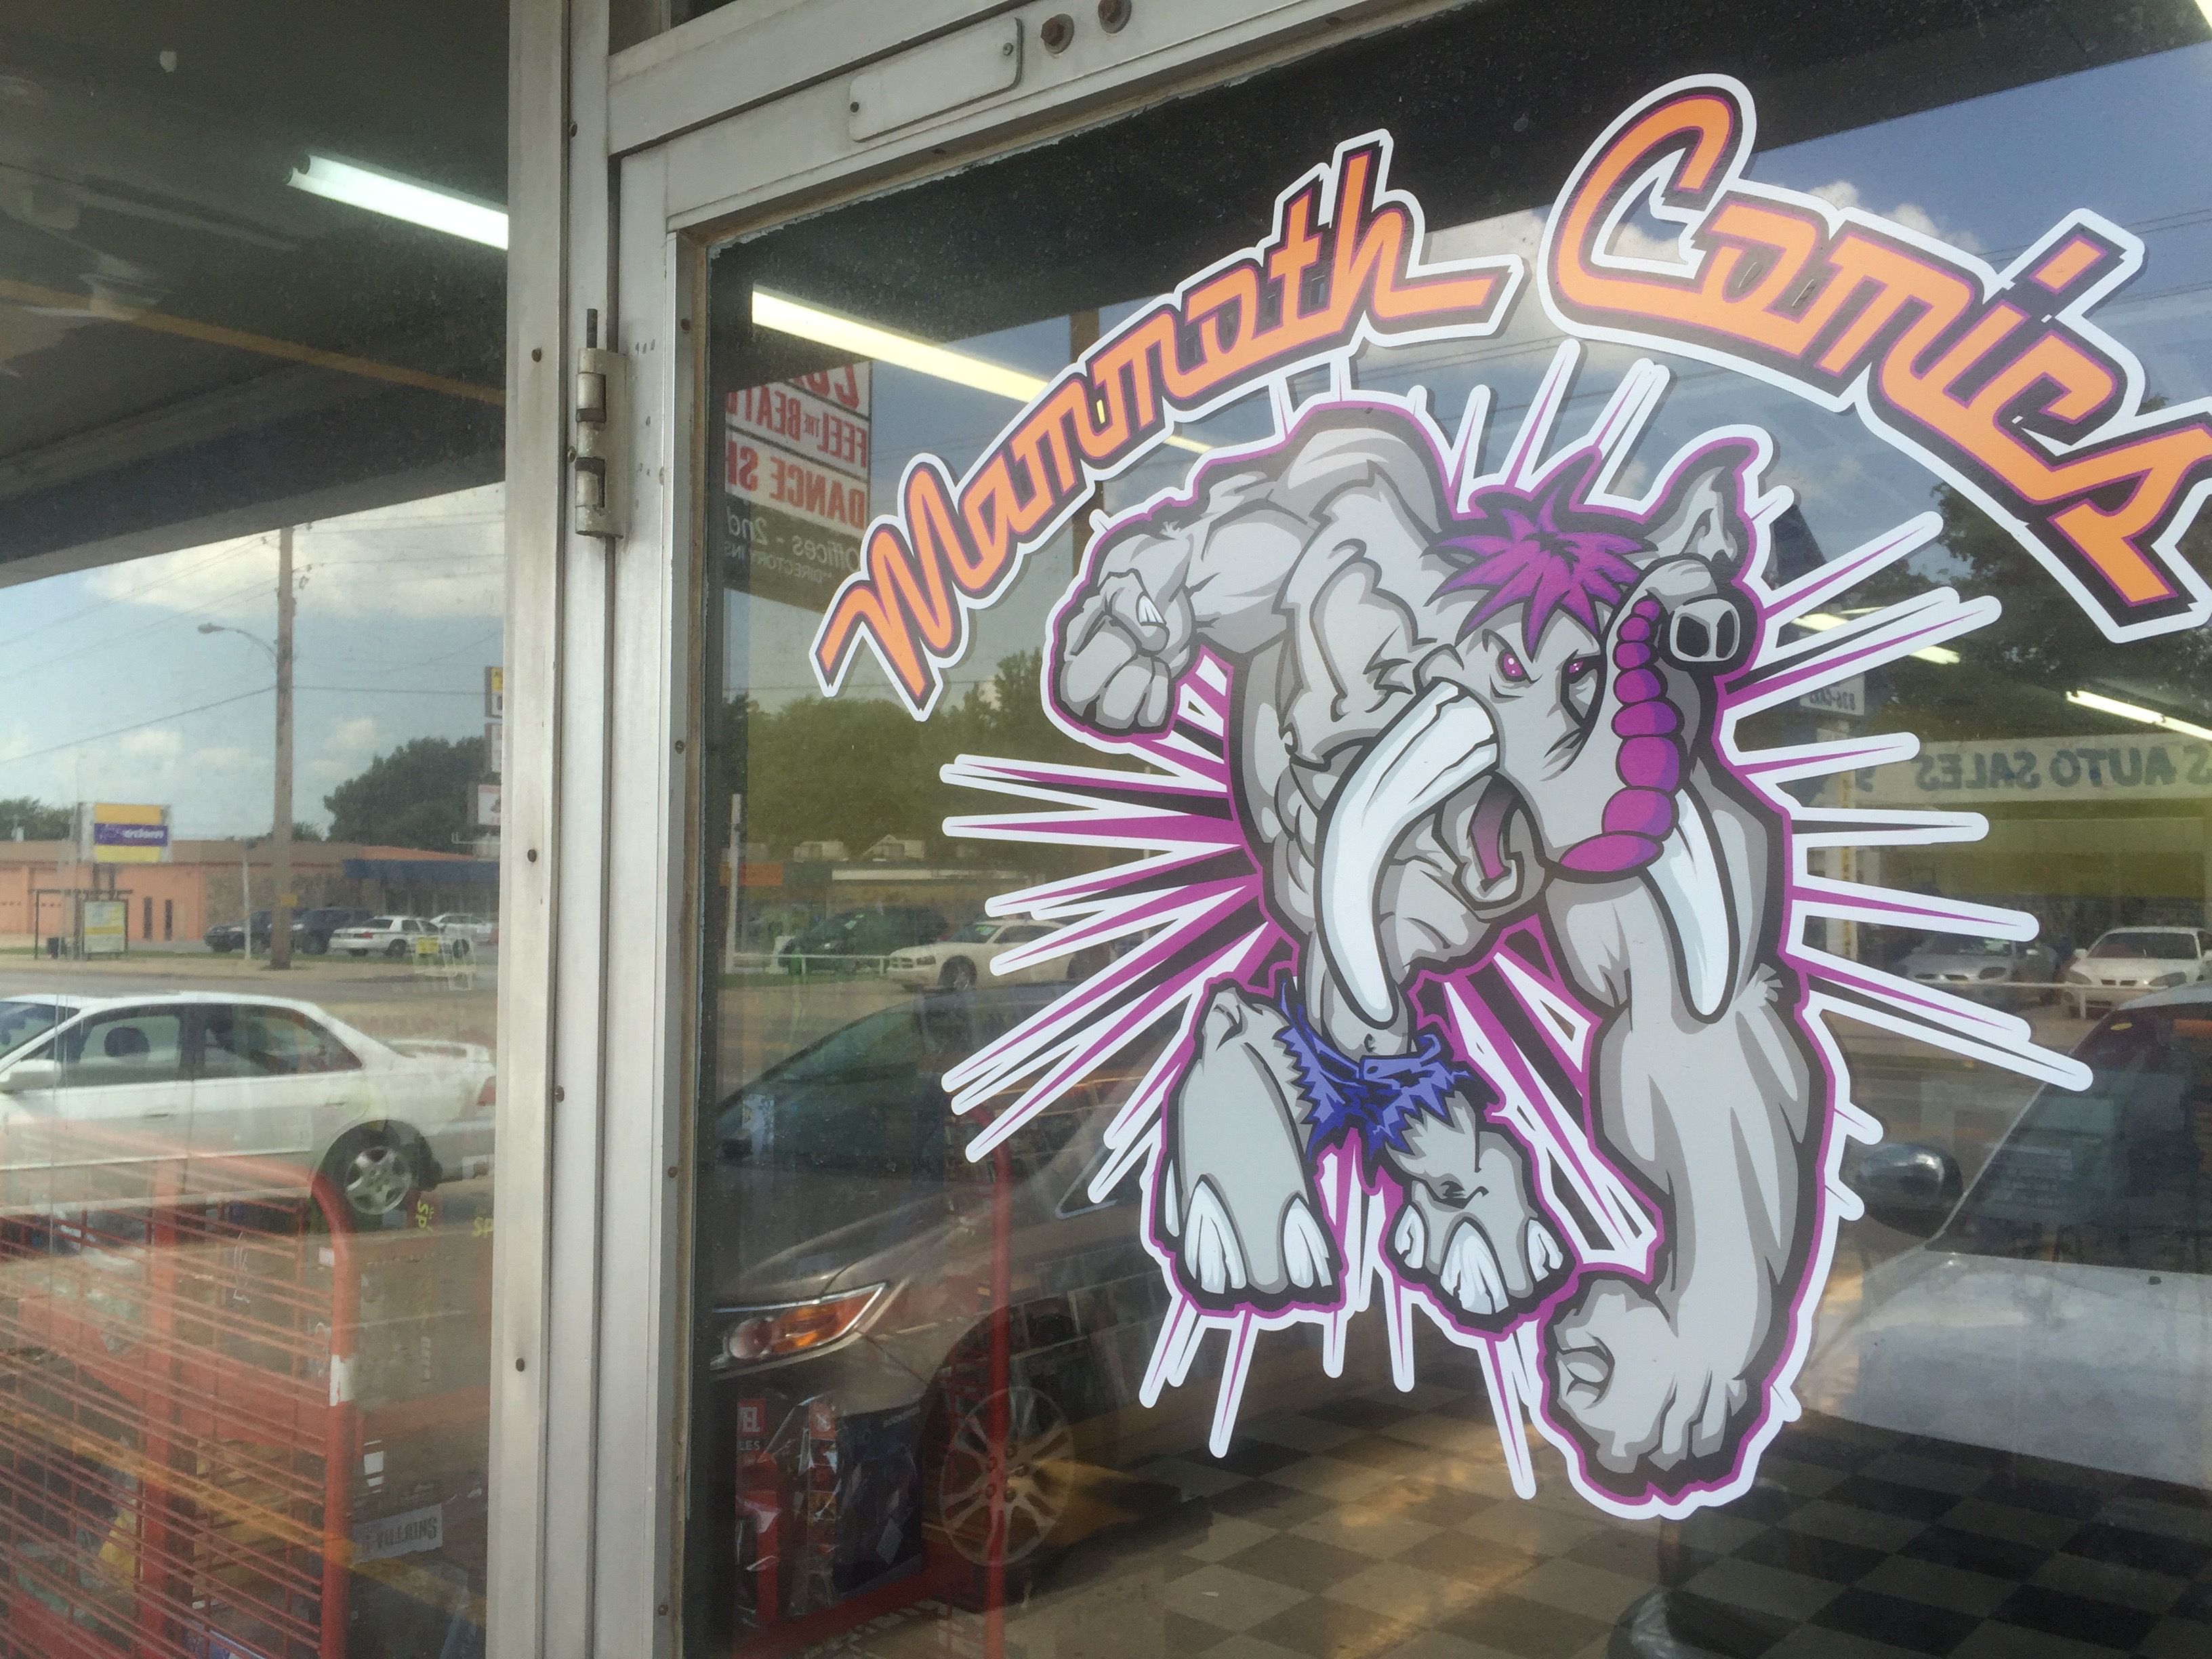 <span  class="uc_style_uc_tiles_grid_image_elementor_uc_items_attribute_title" style="color:#ffffff;">Mammoth Comics in Tulsa, Oklahoma</span>